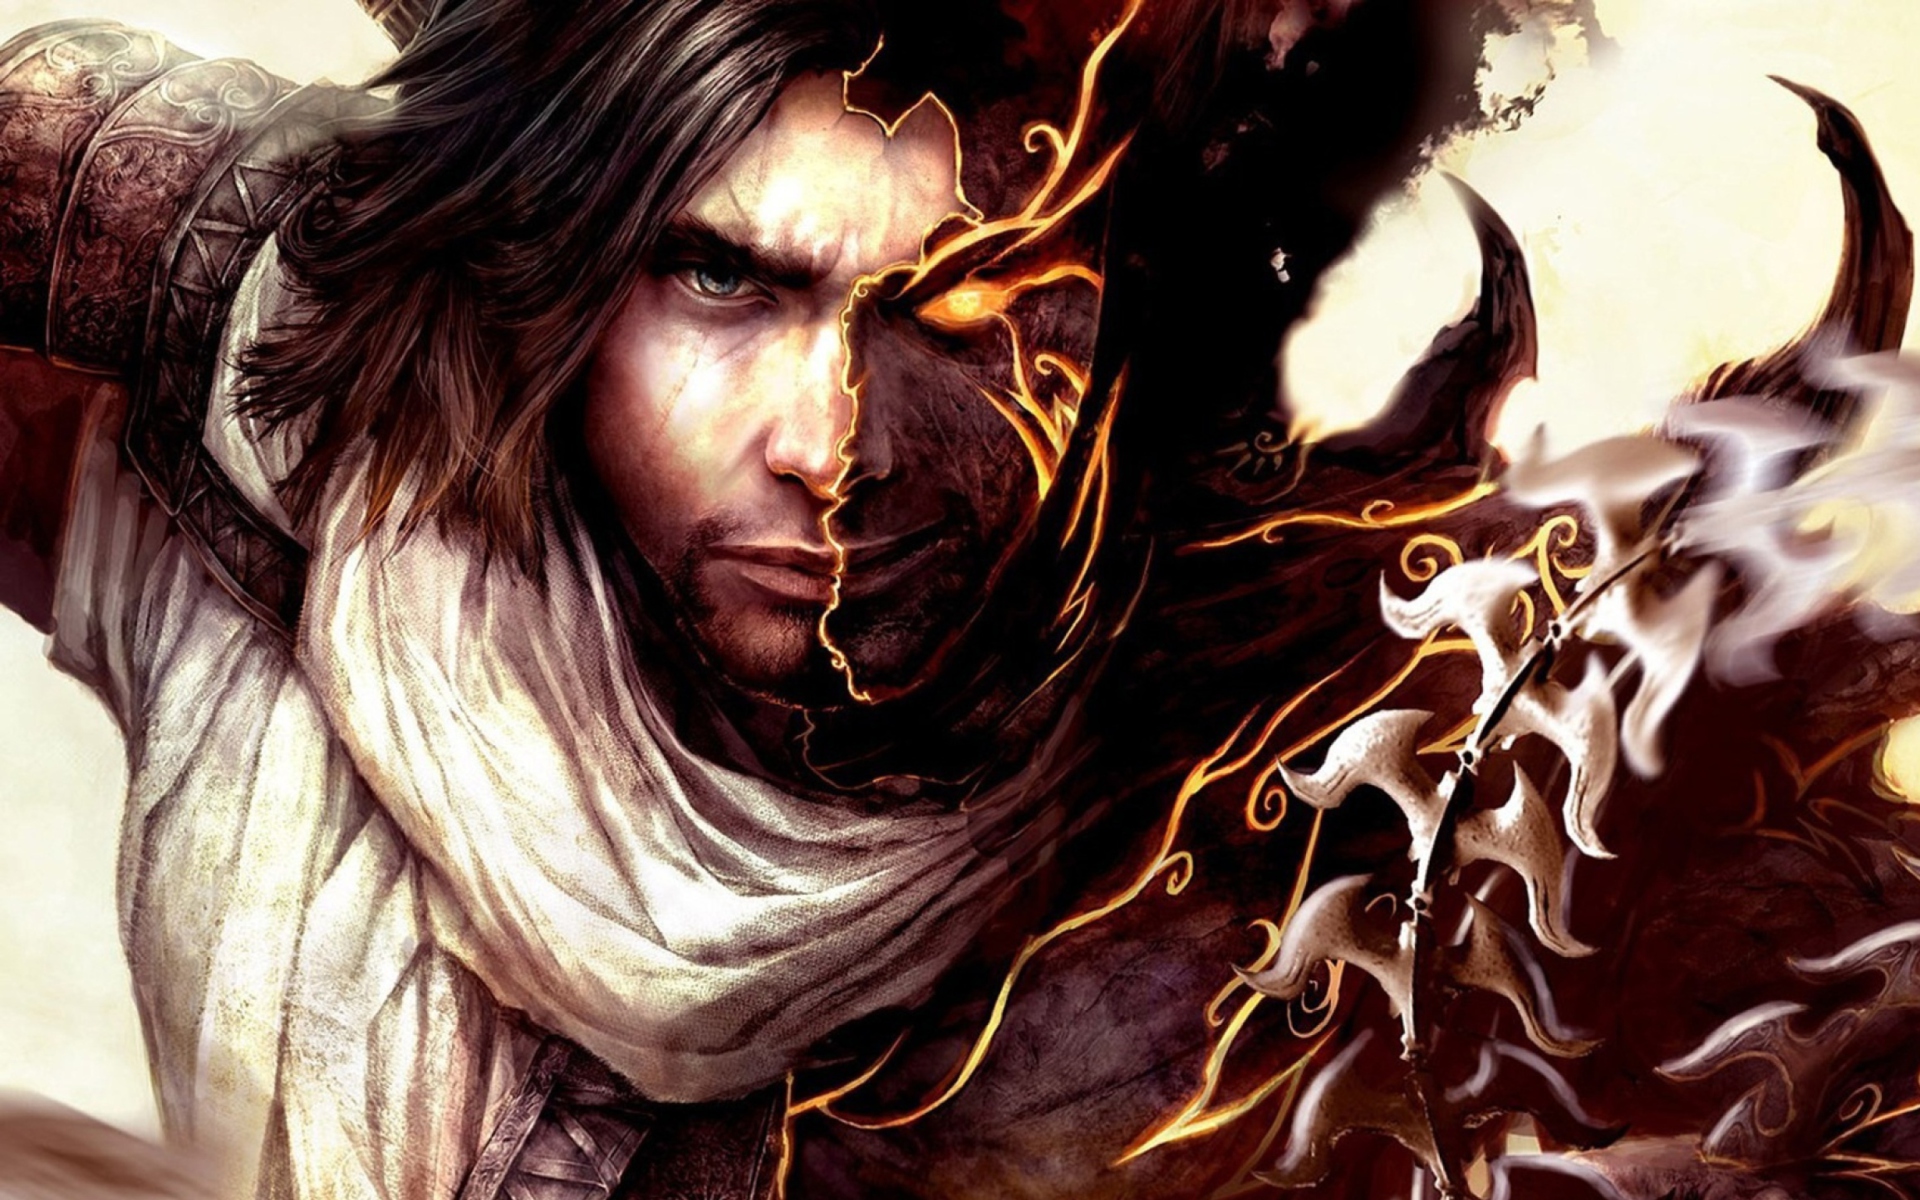 Prince Of Persia - The Two Thrones screenshot #1 1920x1200